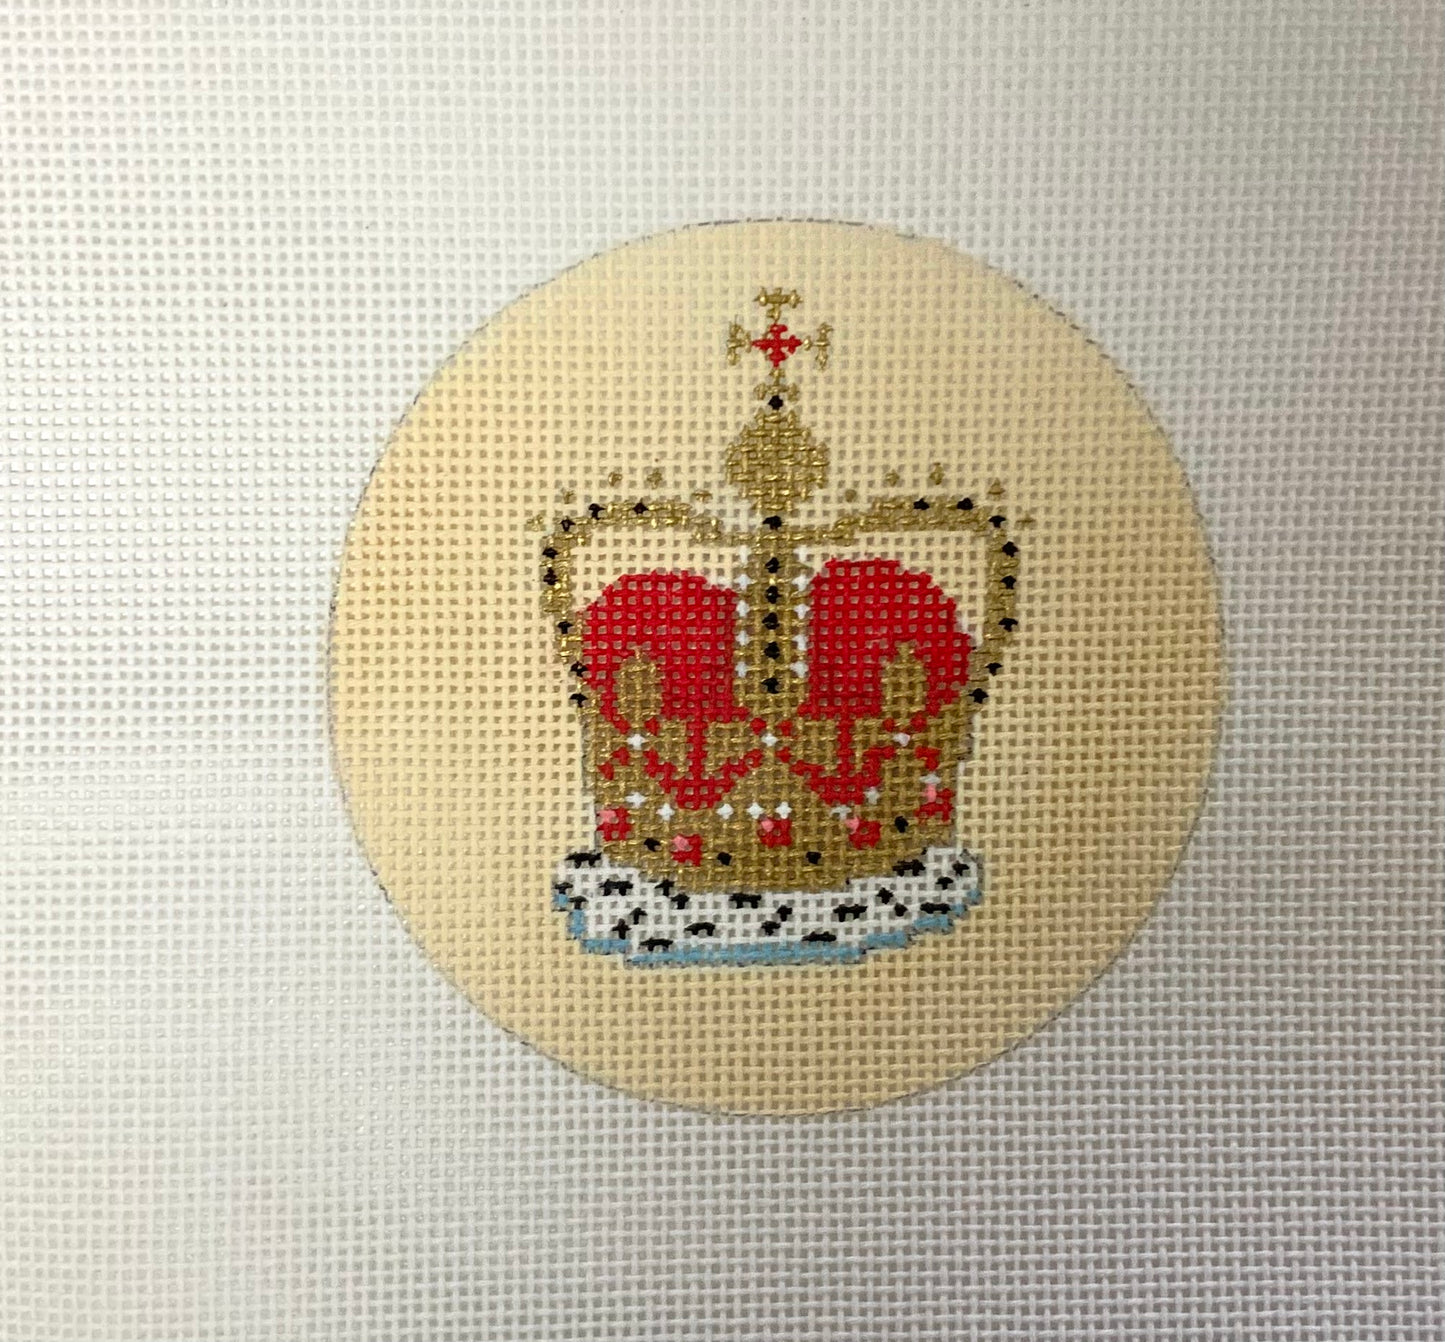 Round Red Crown on Yellow